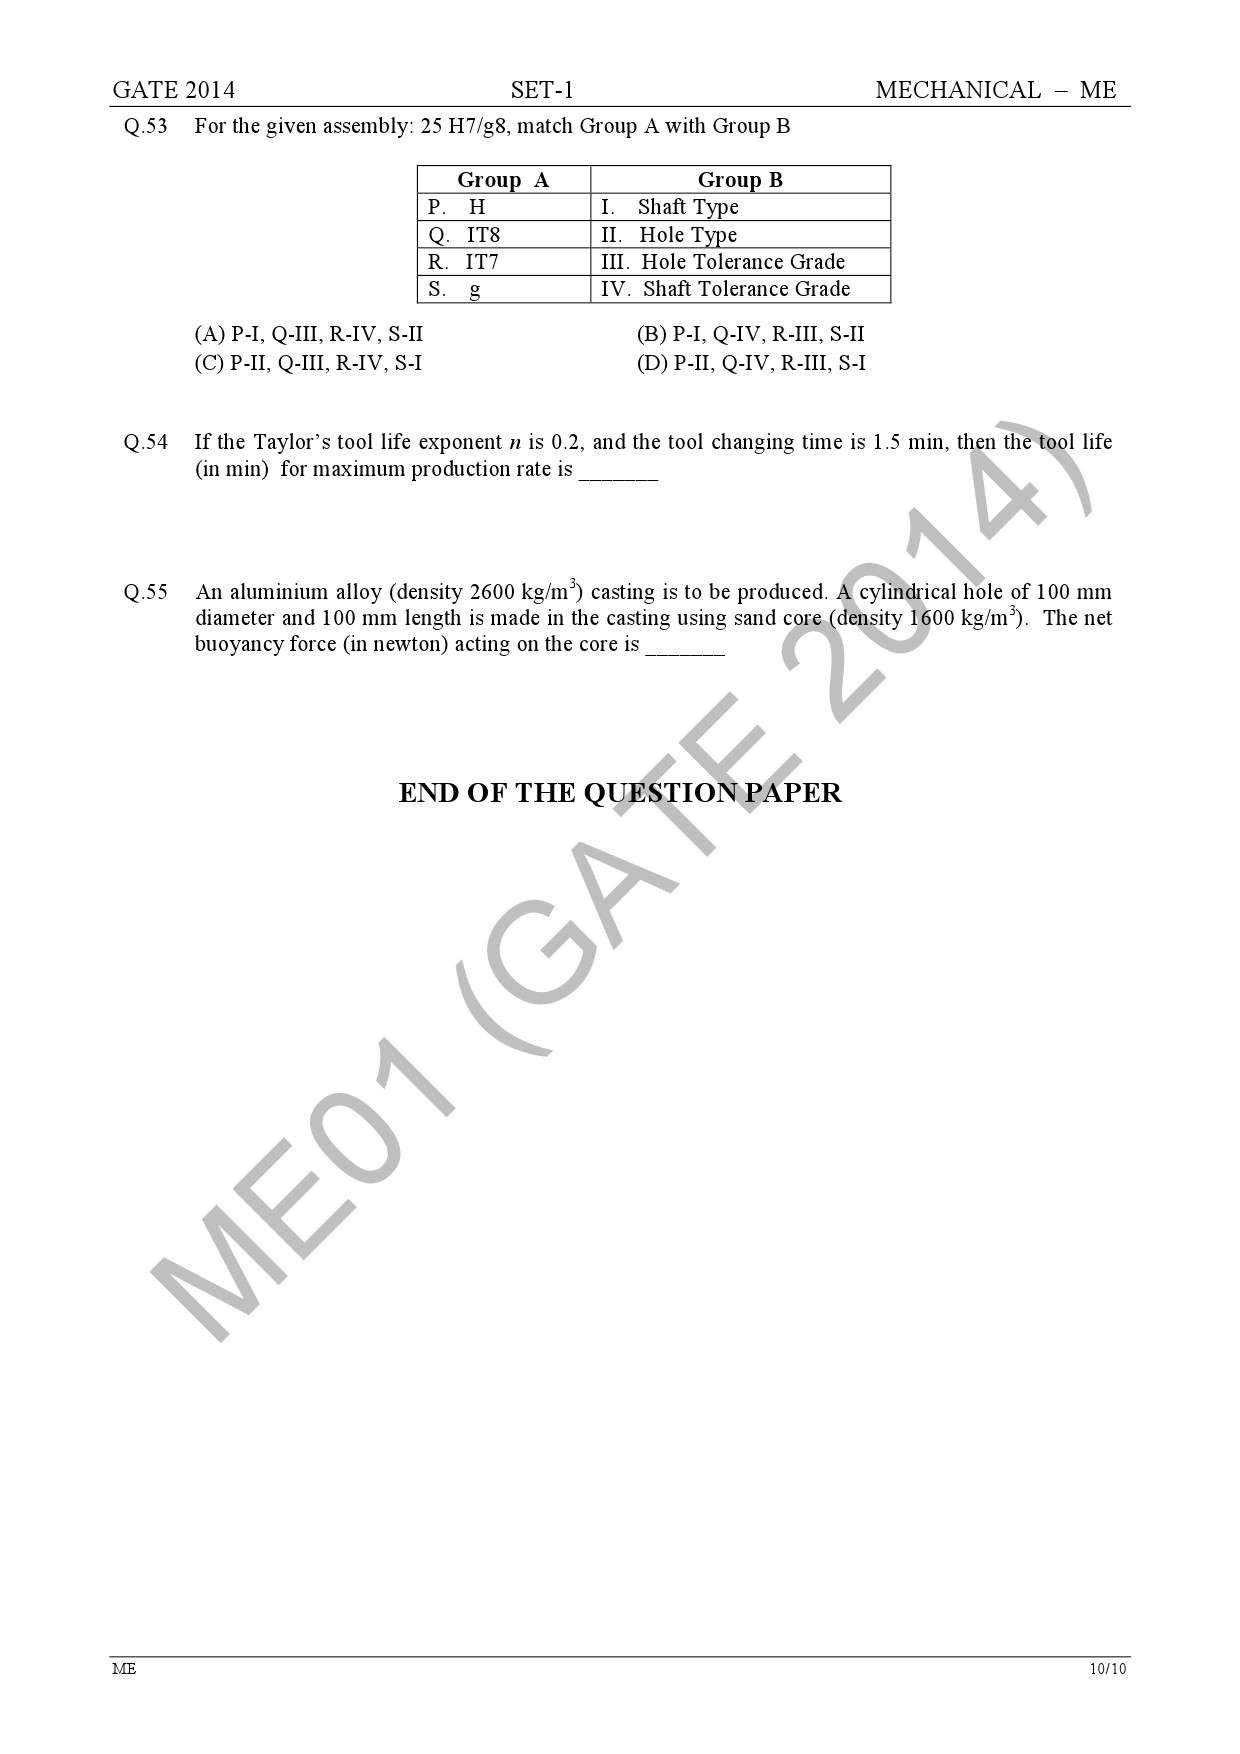 GATE Exam Question Paper 2014 Mechanical Engineering Set 1 16